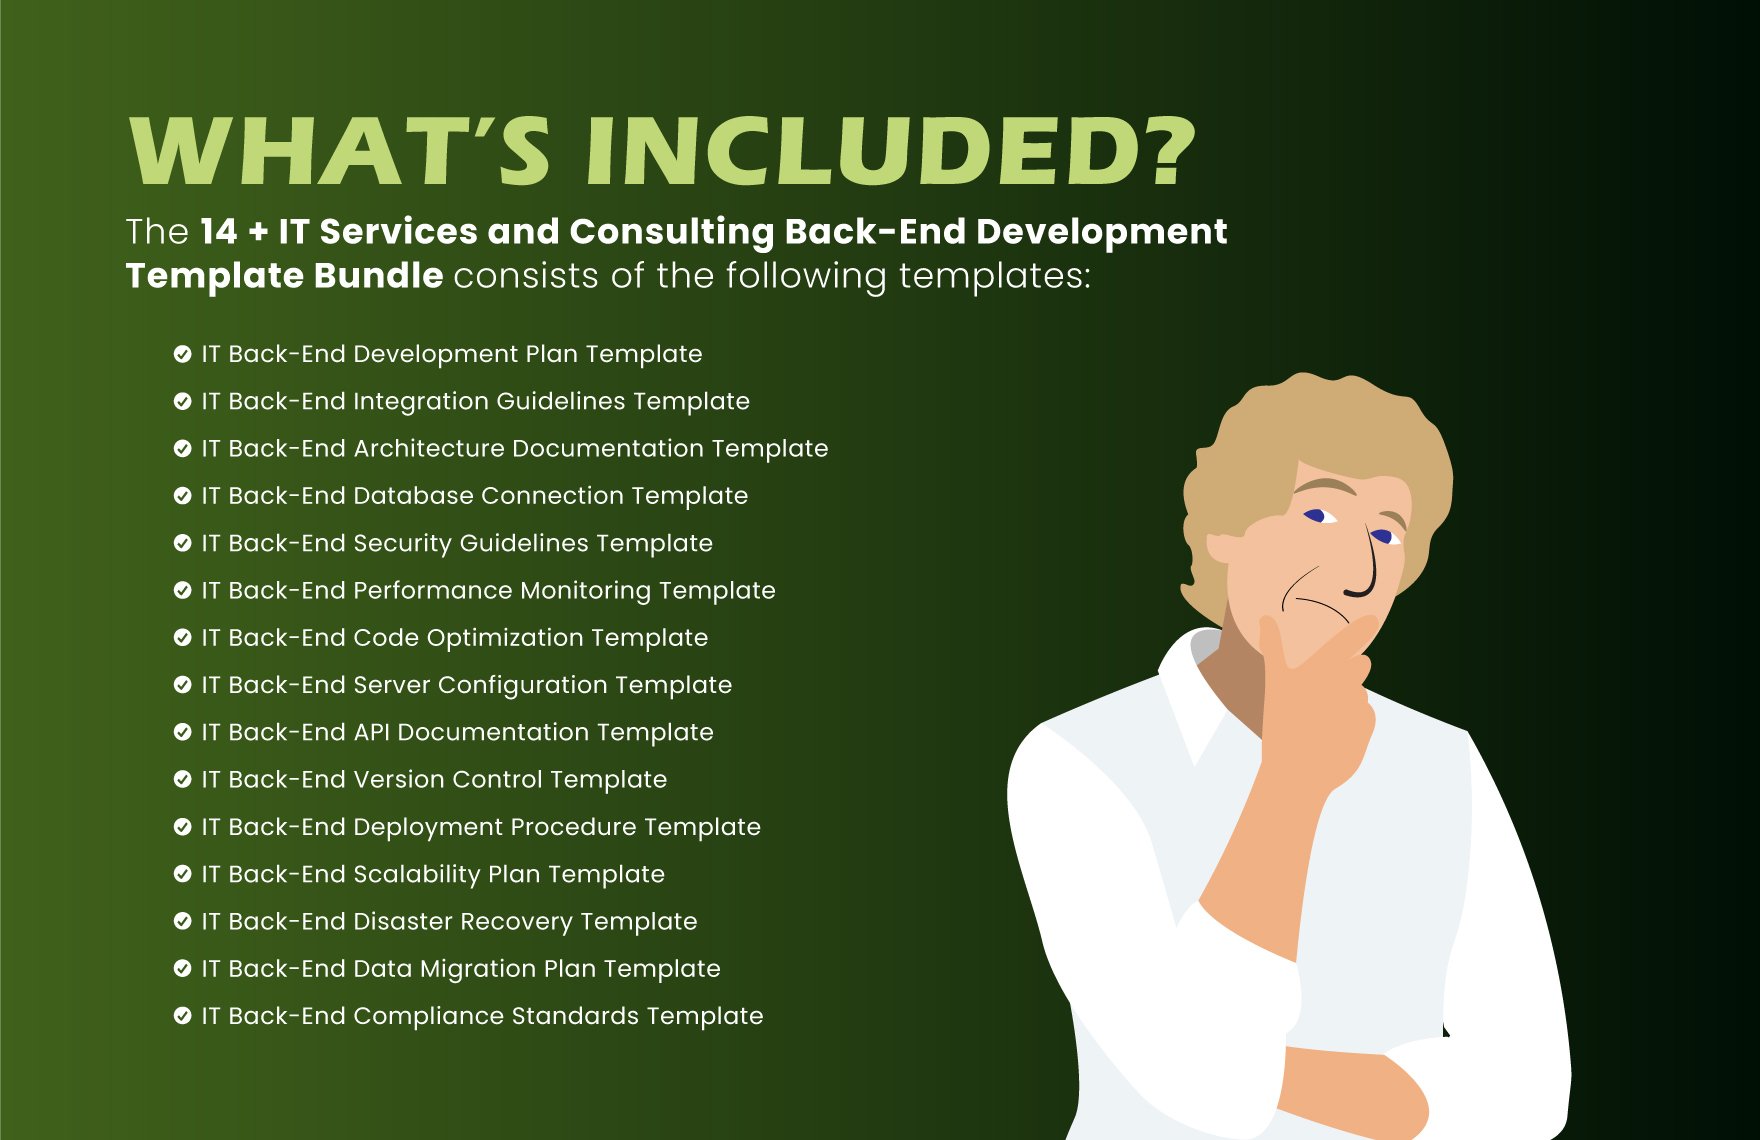 14+ IT Services and Consulting Back-End Development Template Bundle